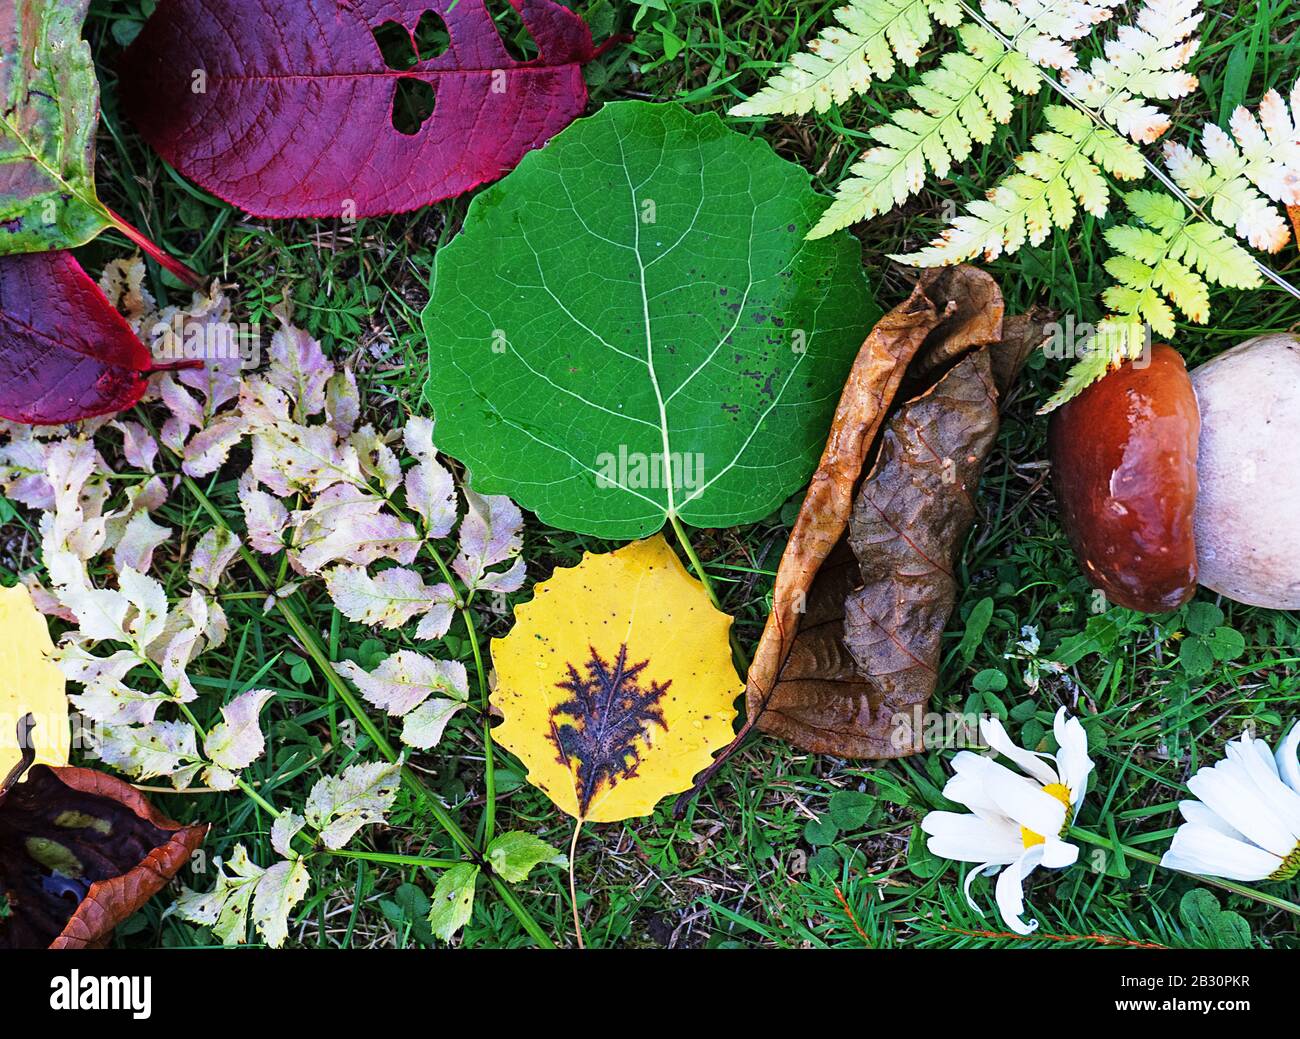 Autumn still-life of their yellow leaves, mushrooms, ferns and last flowers Stock Photo